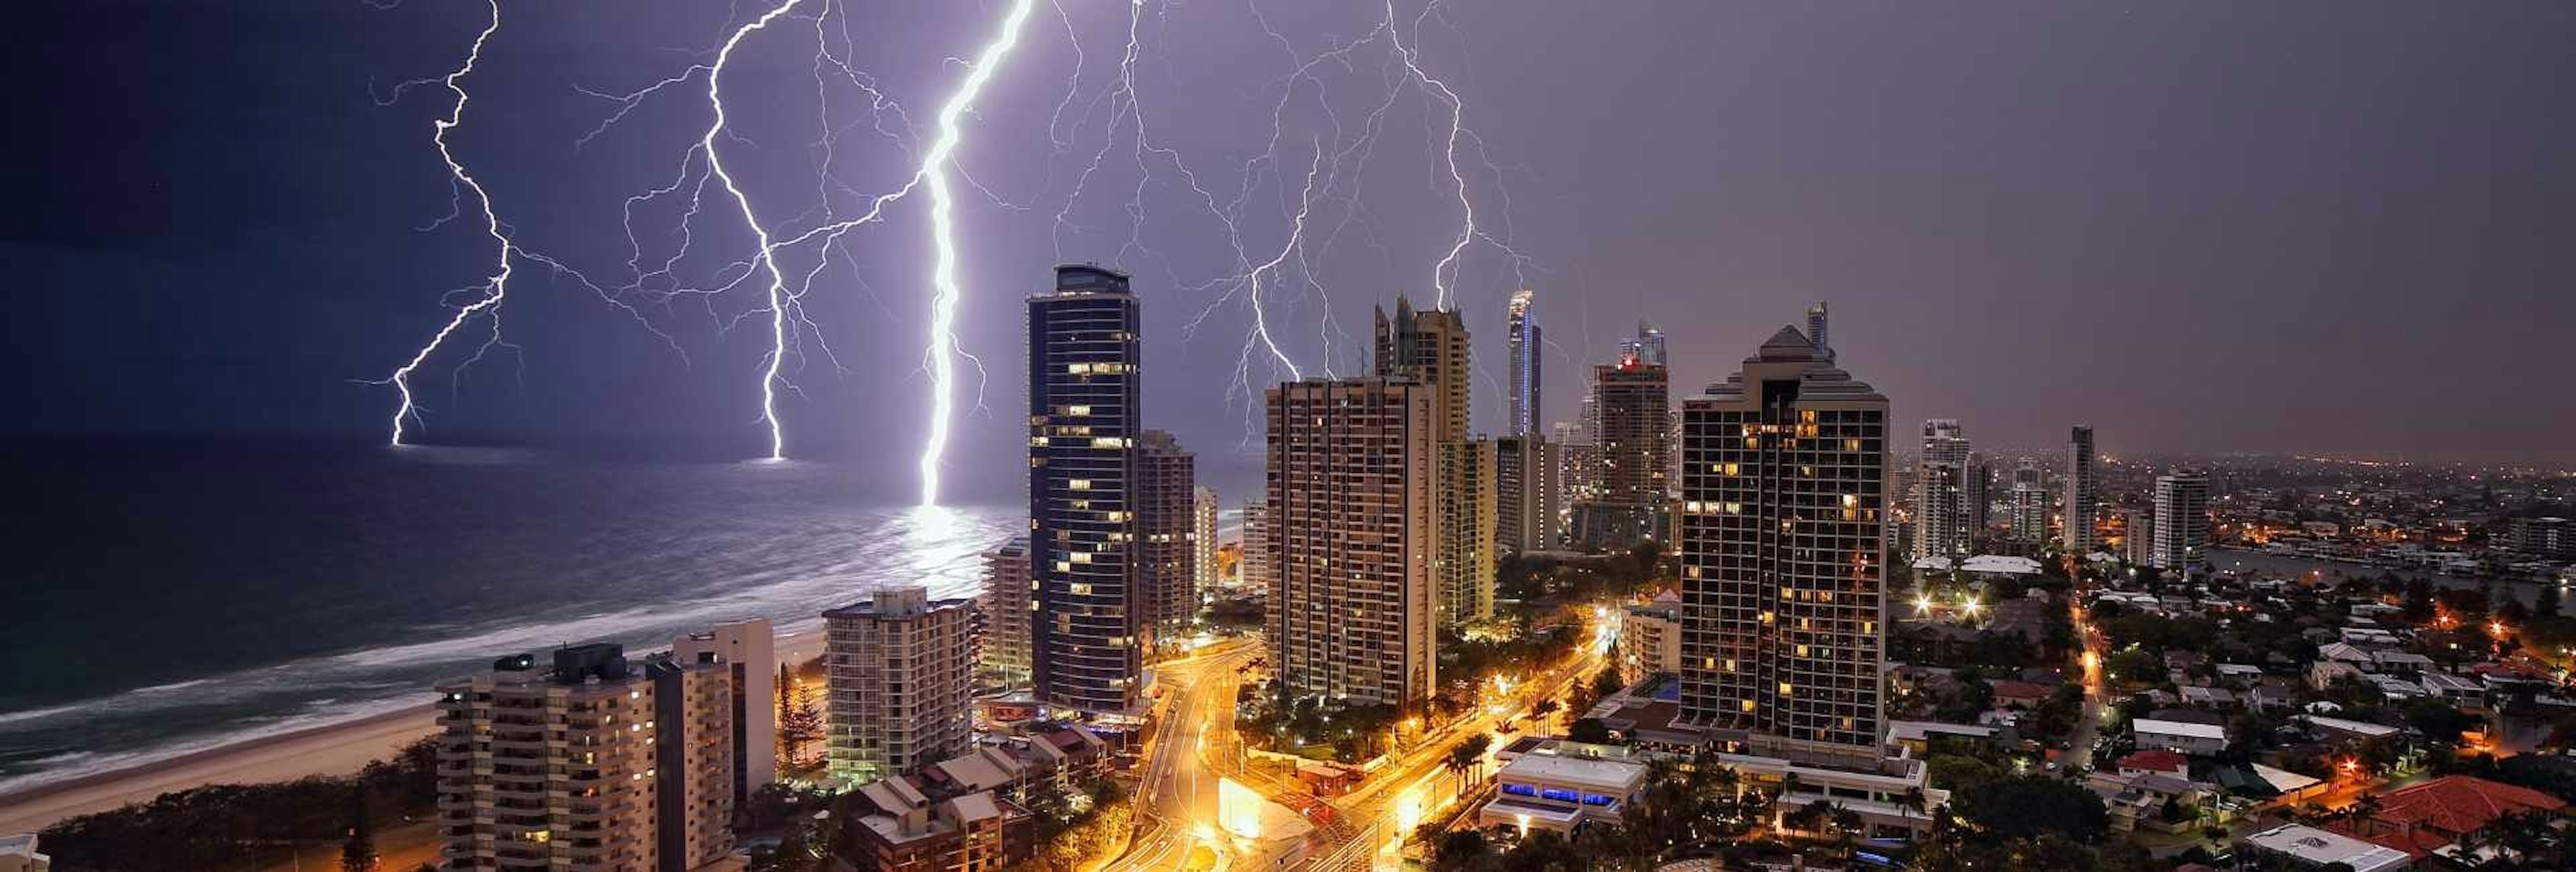 Lighting striking down on high rise buildings at Surfers Paradise, Gold Coast